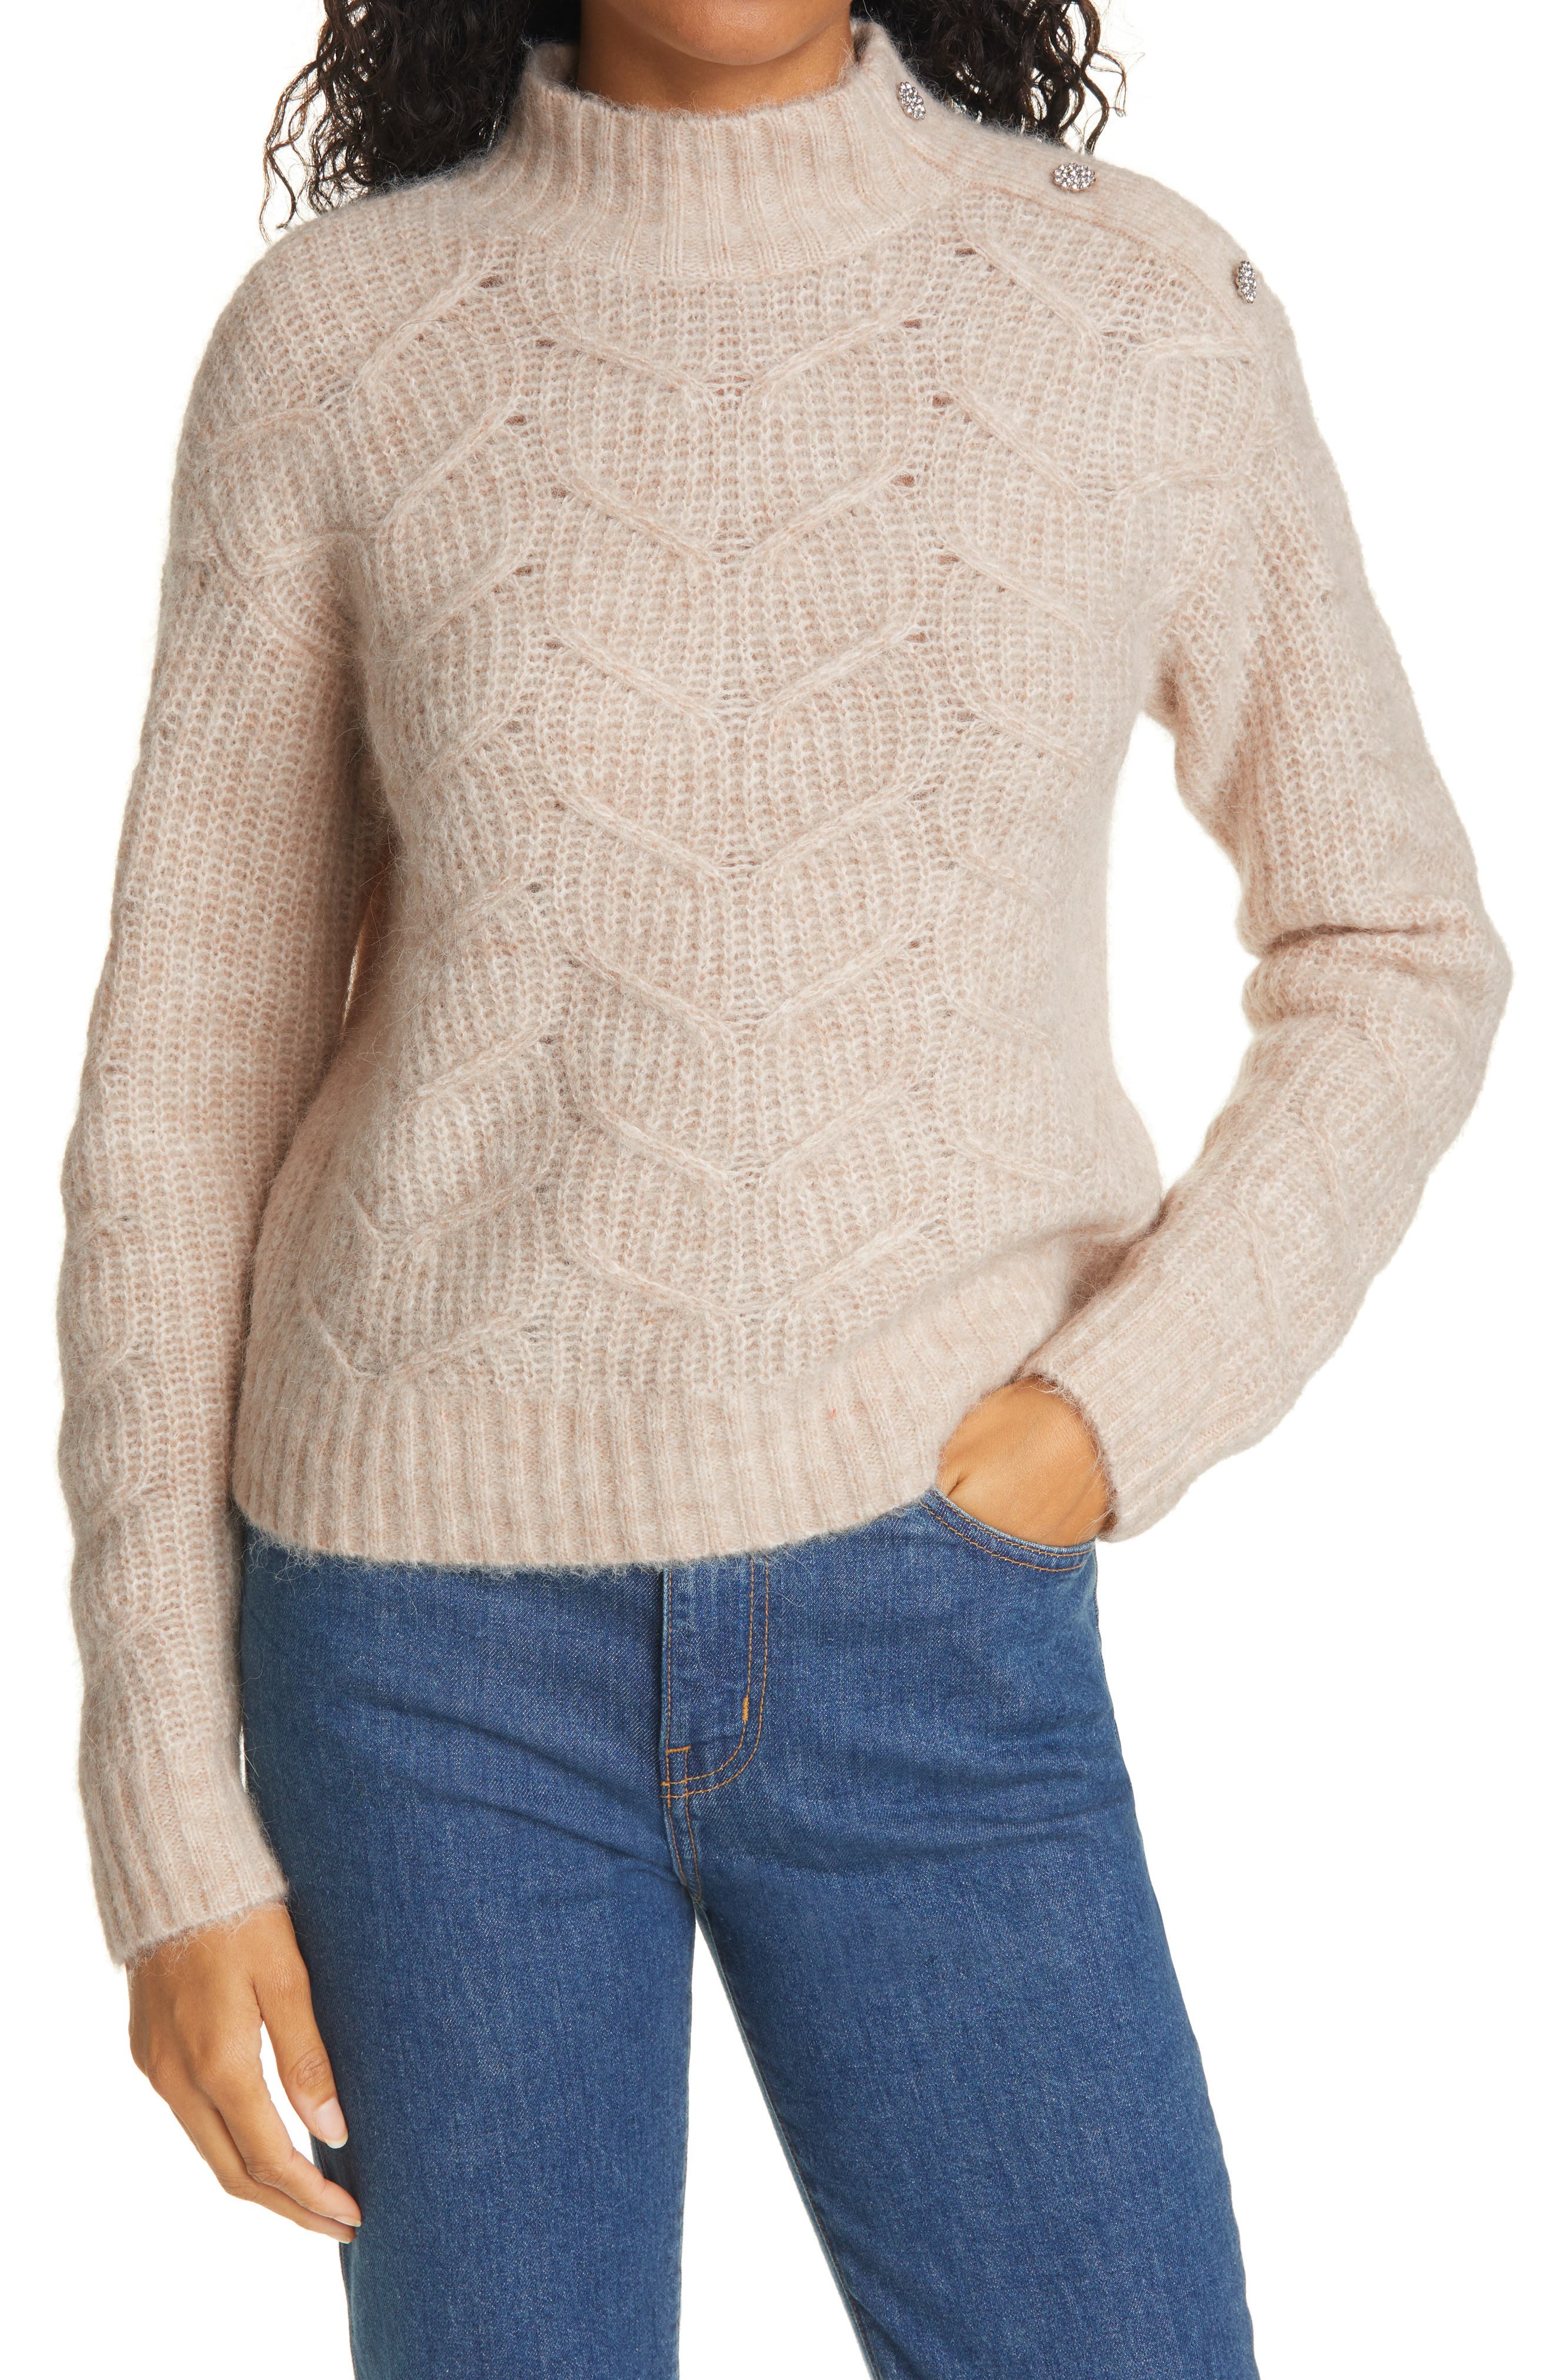 TED BAKER RHINESTONE BUTTON WOOL & ALPACA BLEND CABLE SWEATER,5059489212966